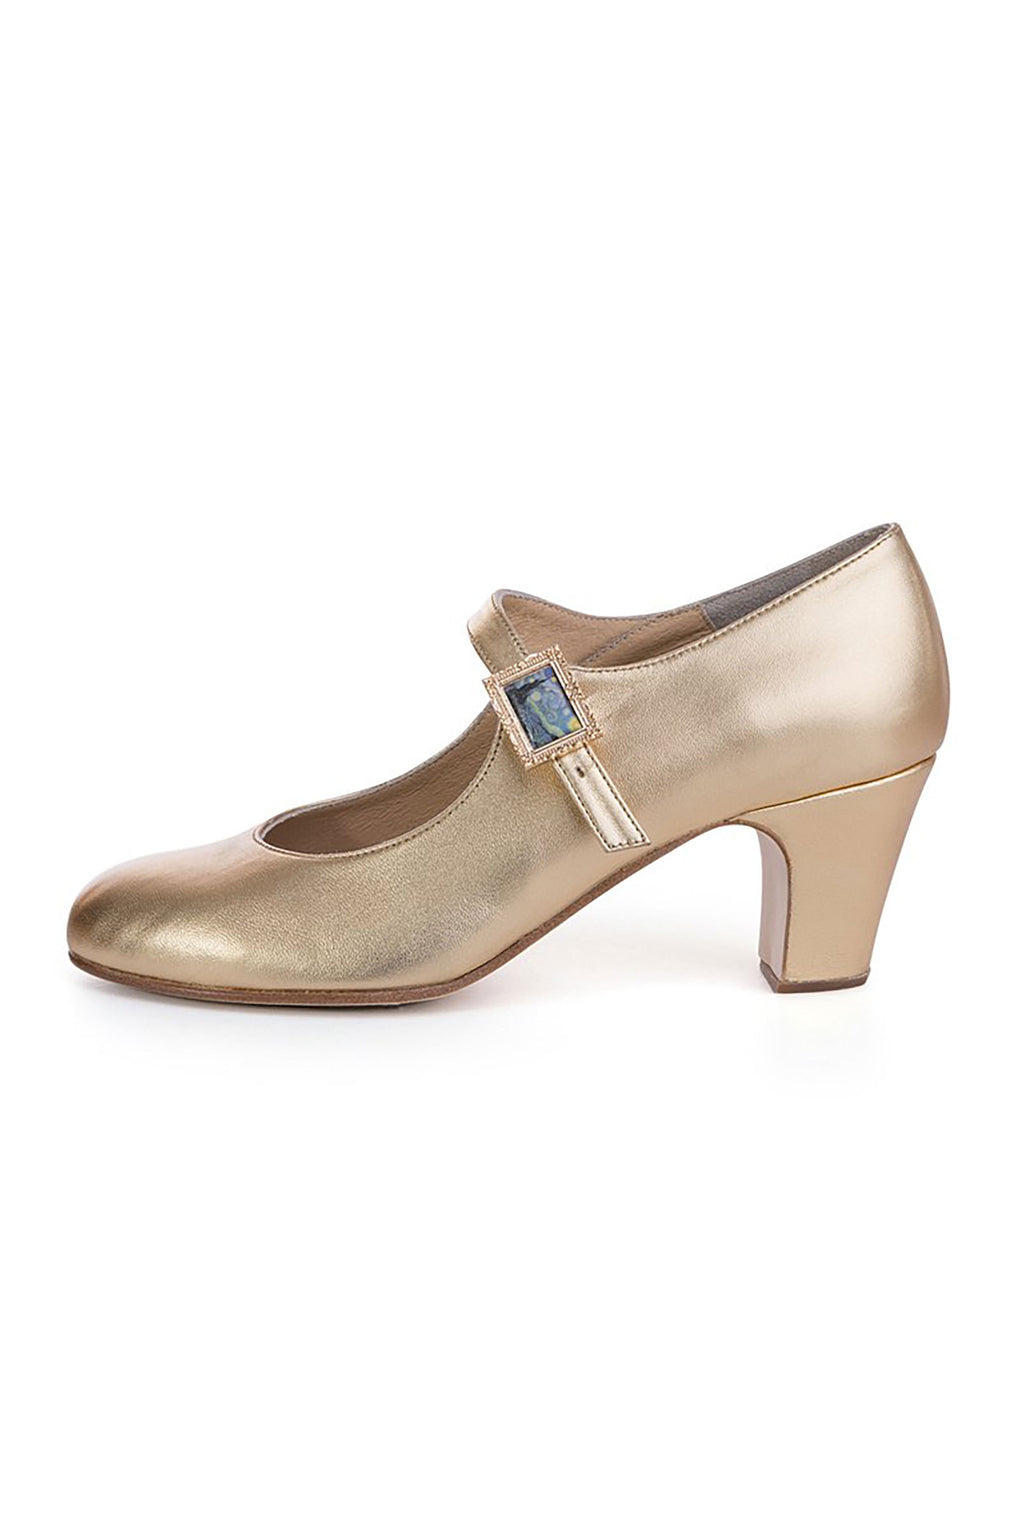 Gold Leather Flamenco Heels with Starry Night Buckle